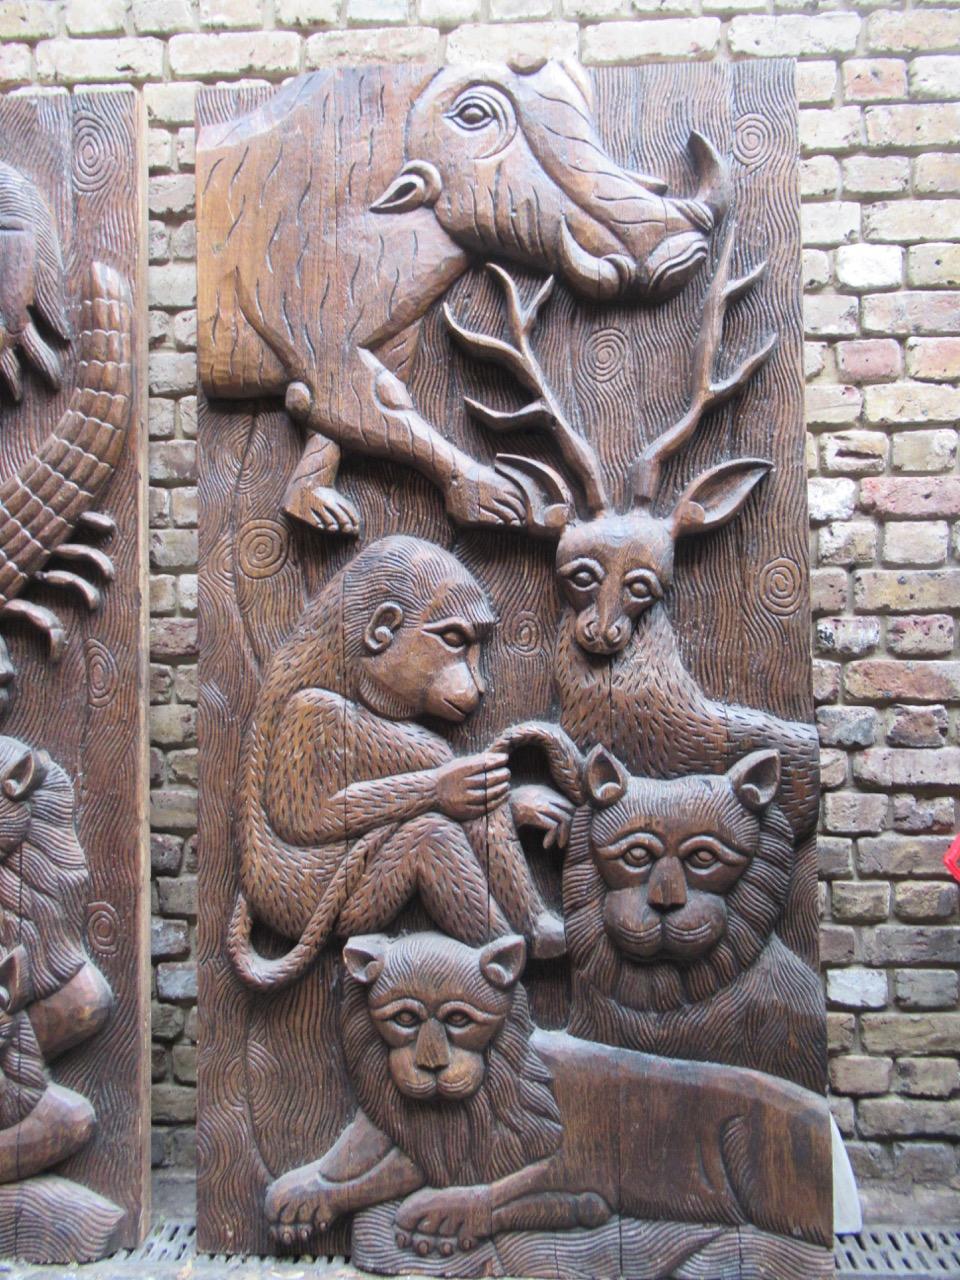 English Pair of Decorative Carved Teak Wood Panels with Monkeys and Other Wild Animals